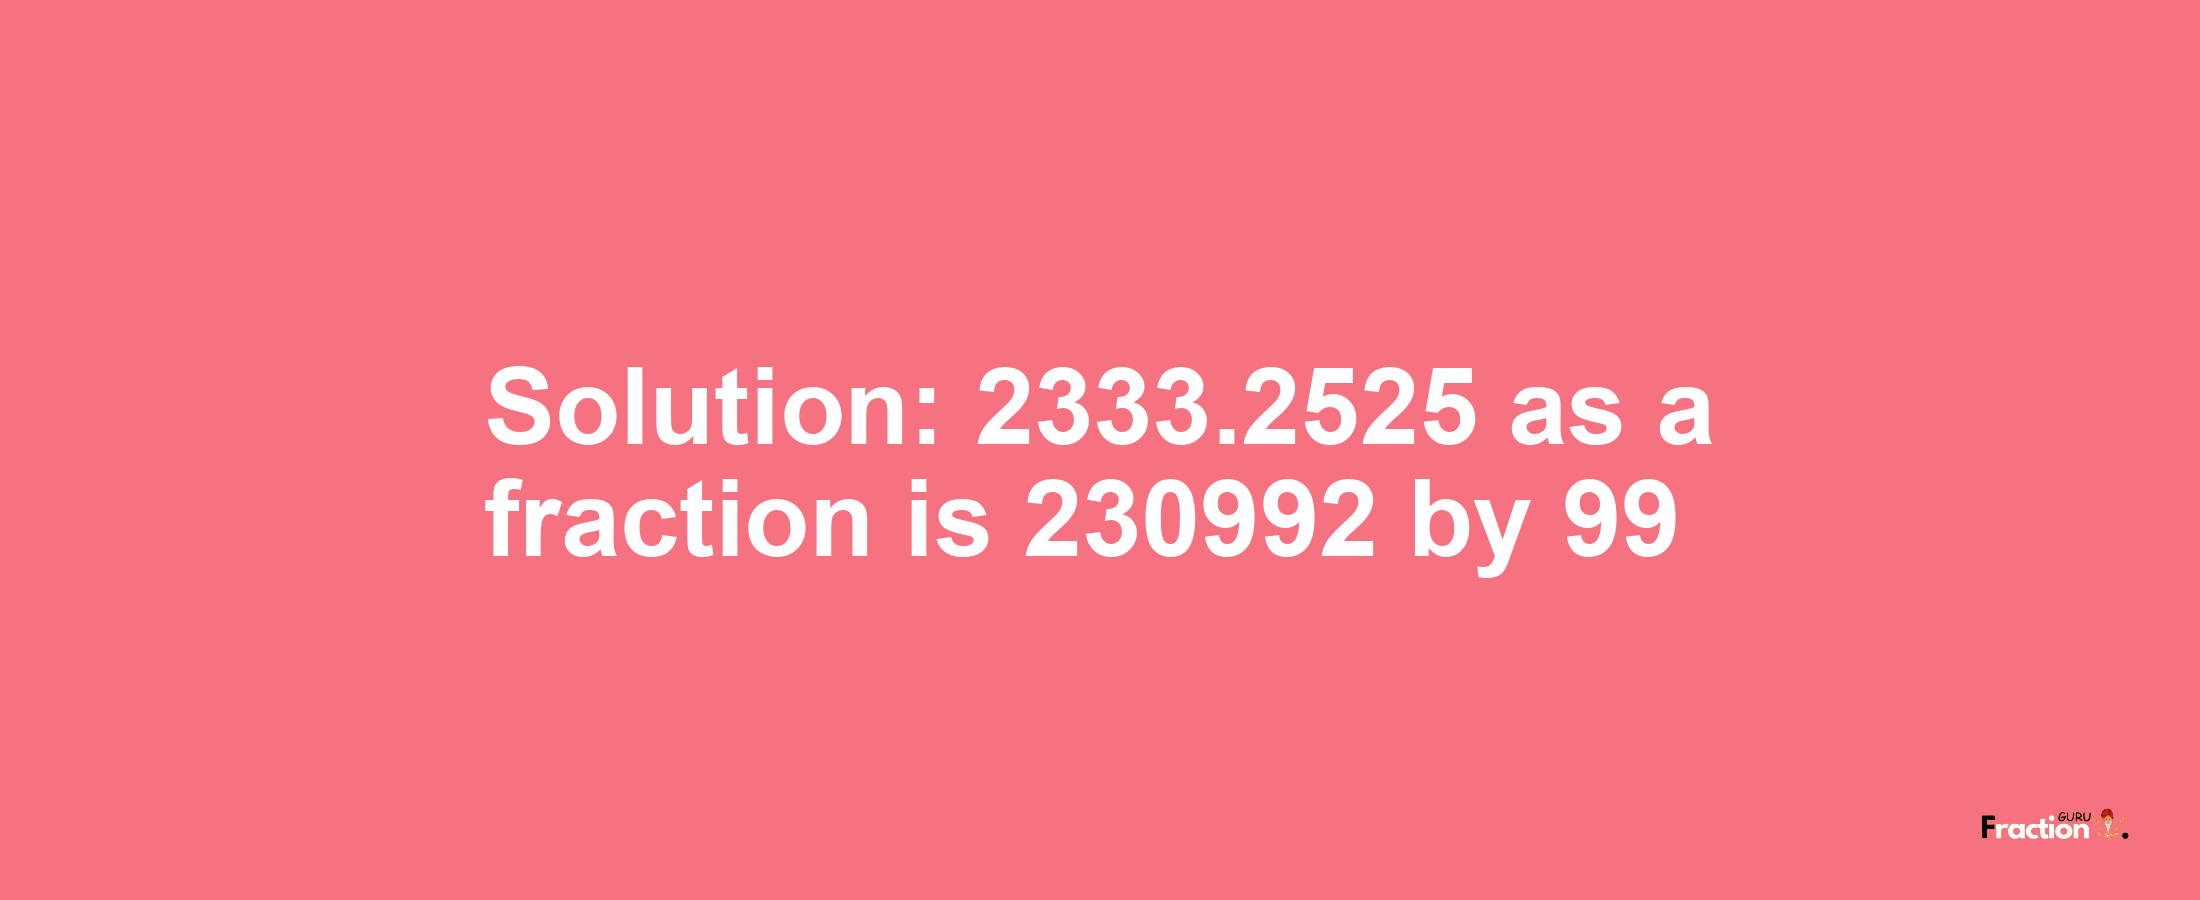 Solution:2333.2525 as a fraction is 230992/99